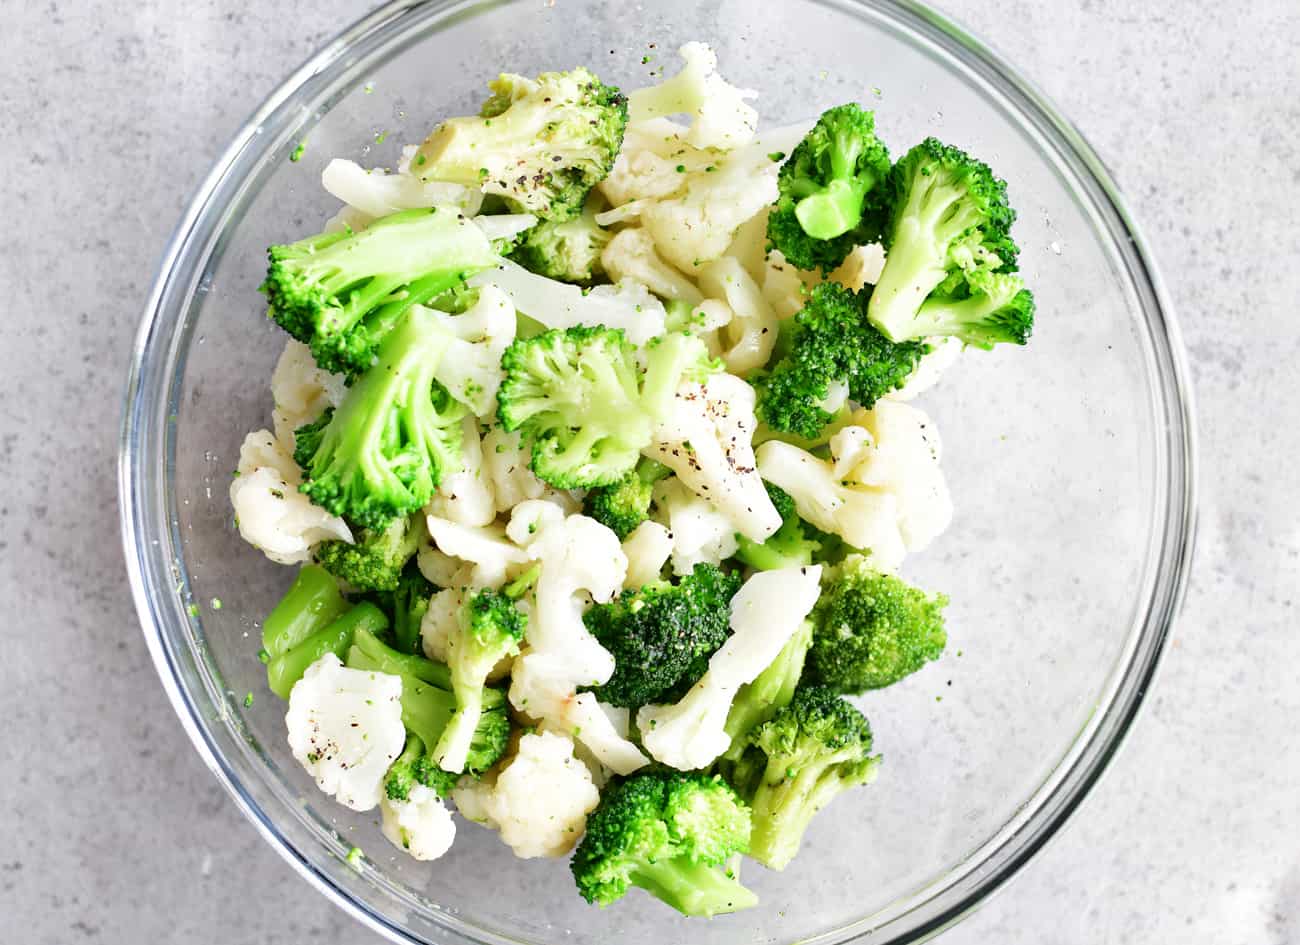 mixed broccoli and cauliflower for oven roasted vegetables